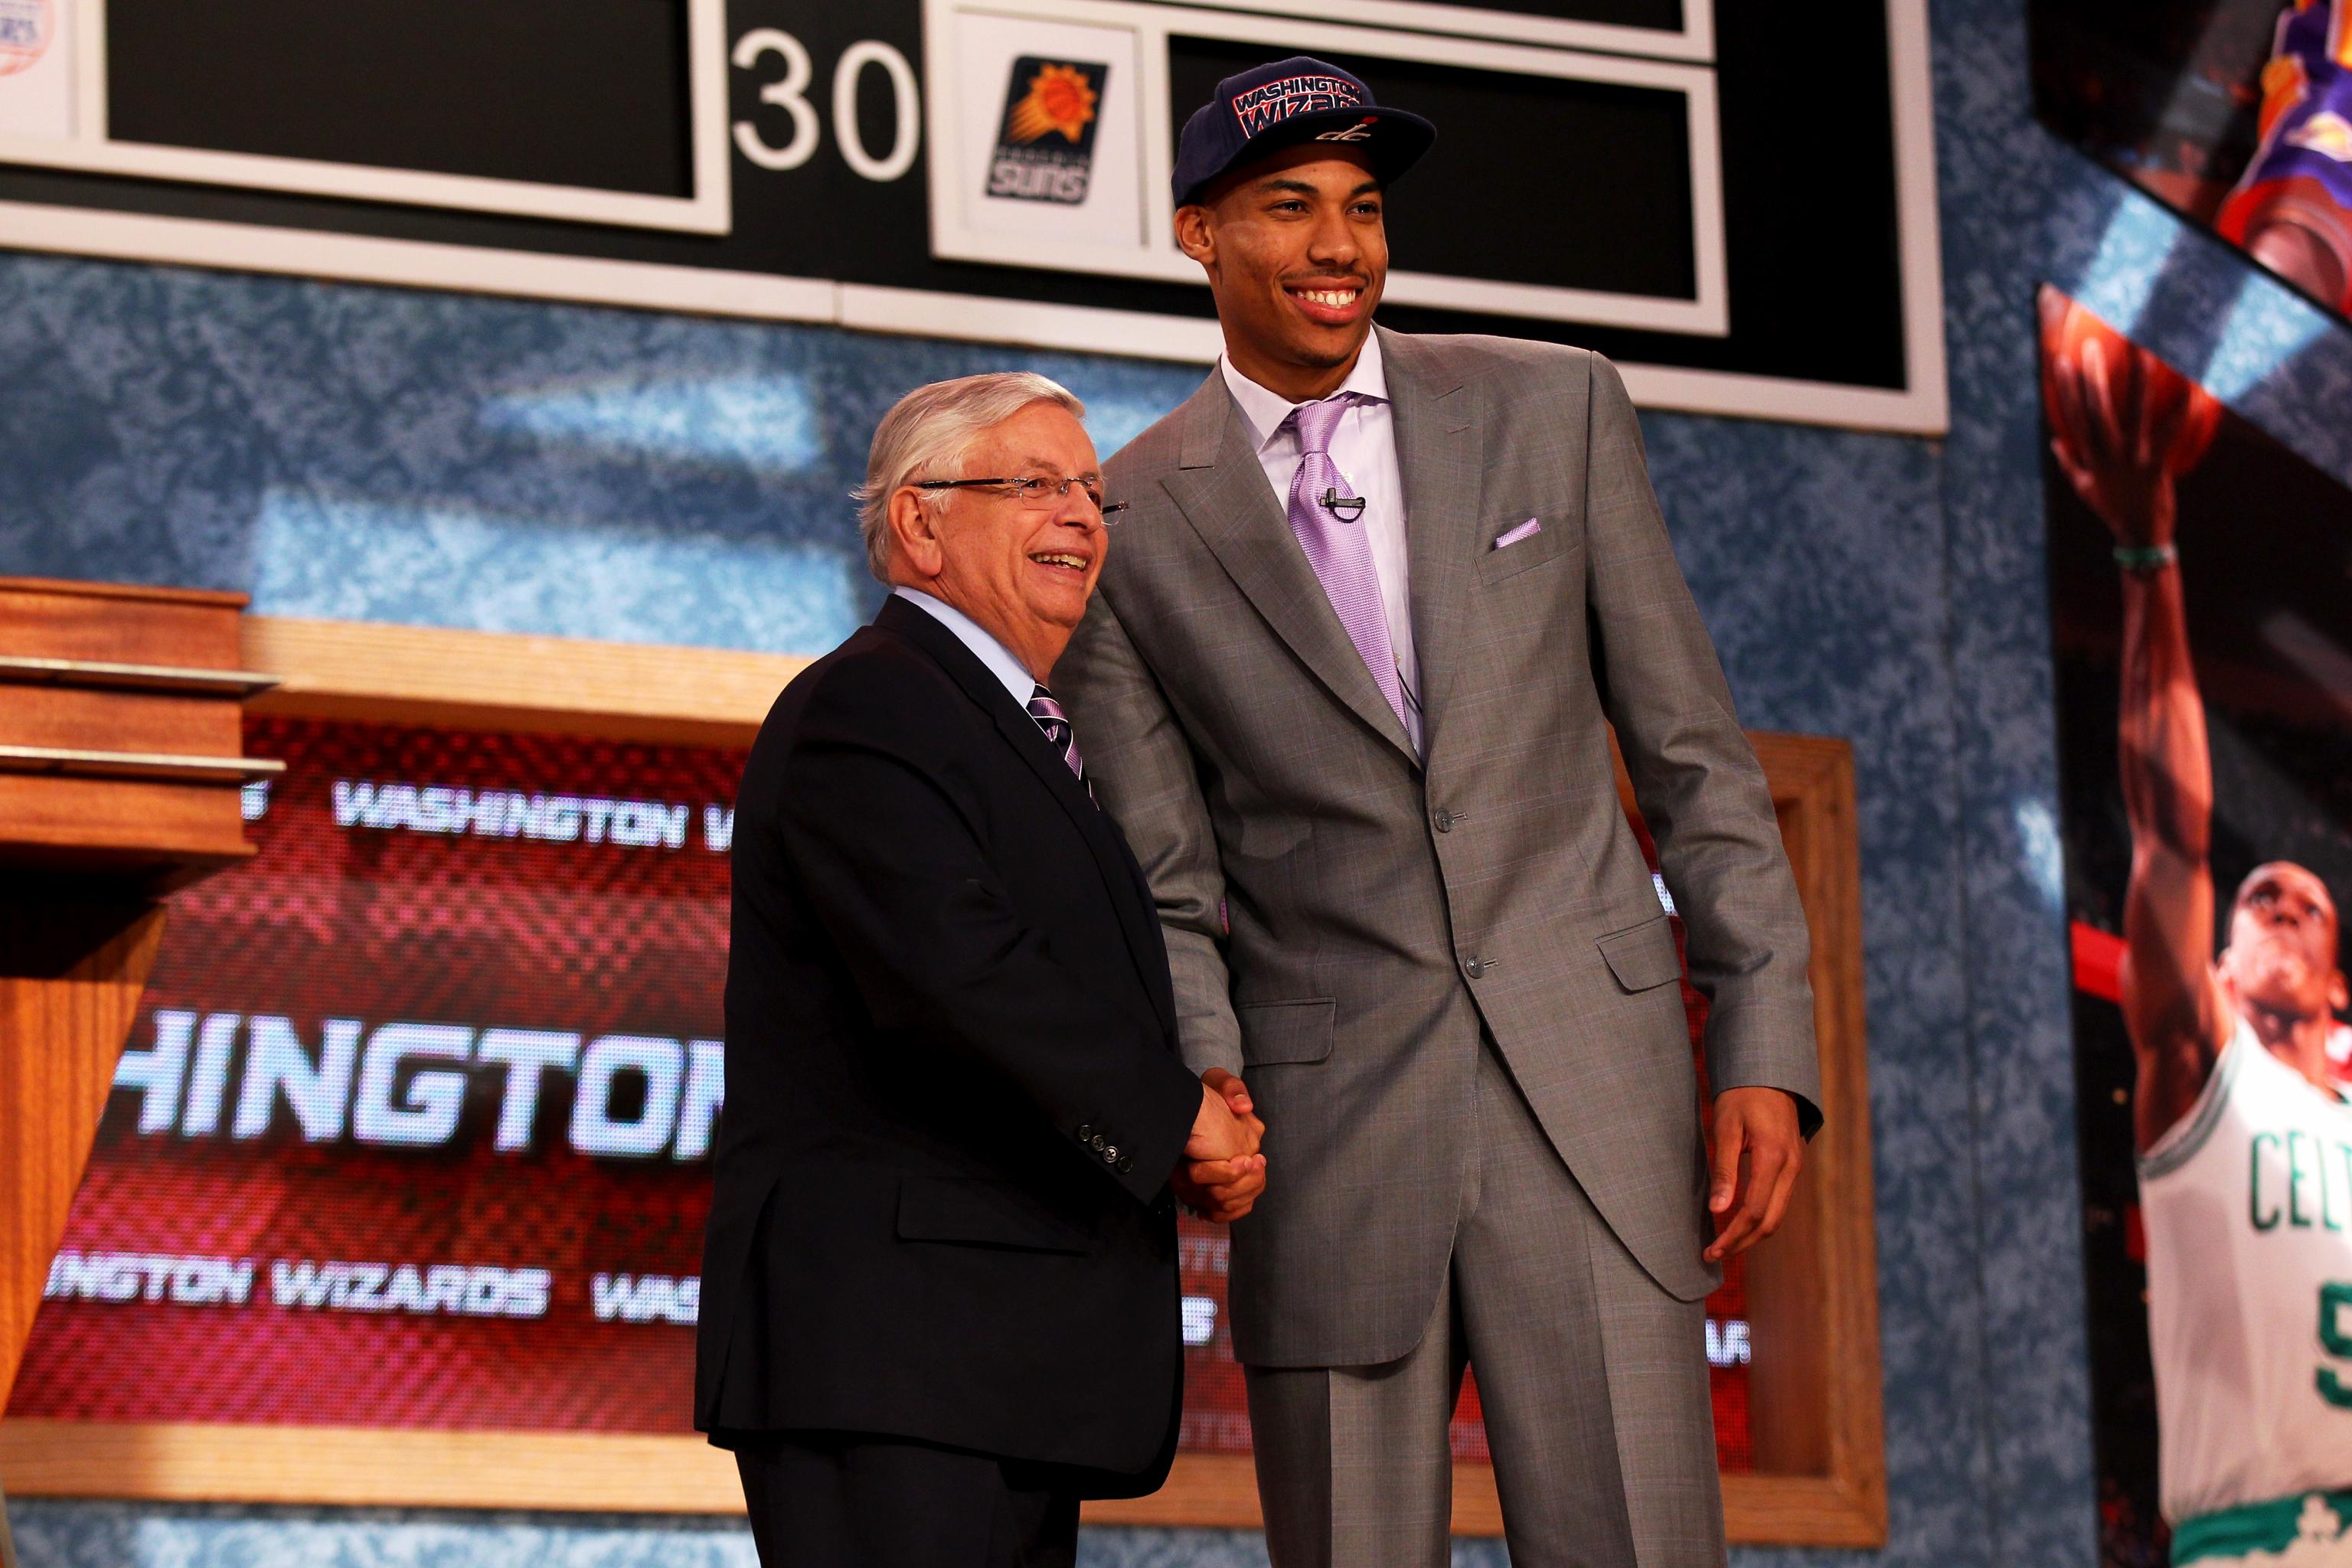 2013 Draft in Review: A tale of two top picks - Beyond the Box Score